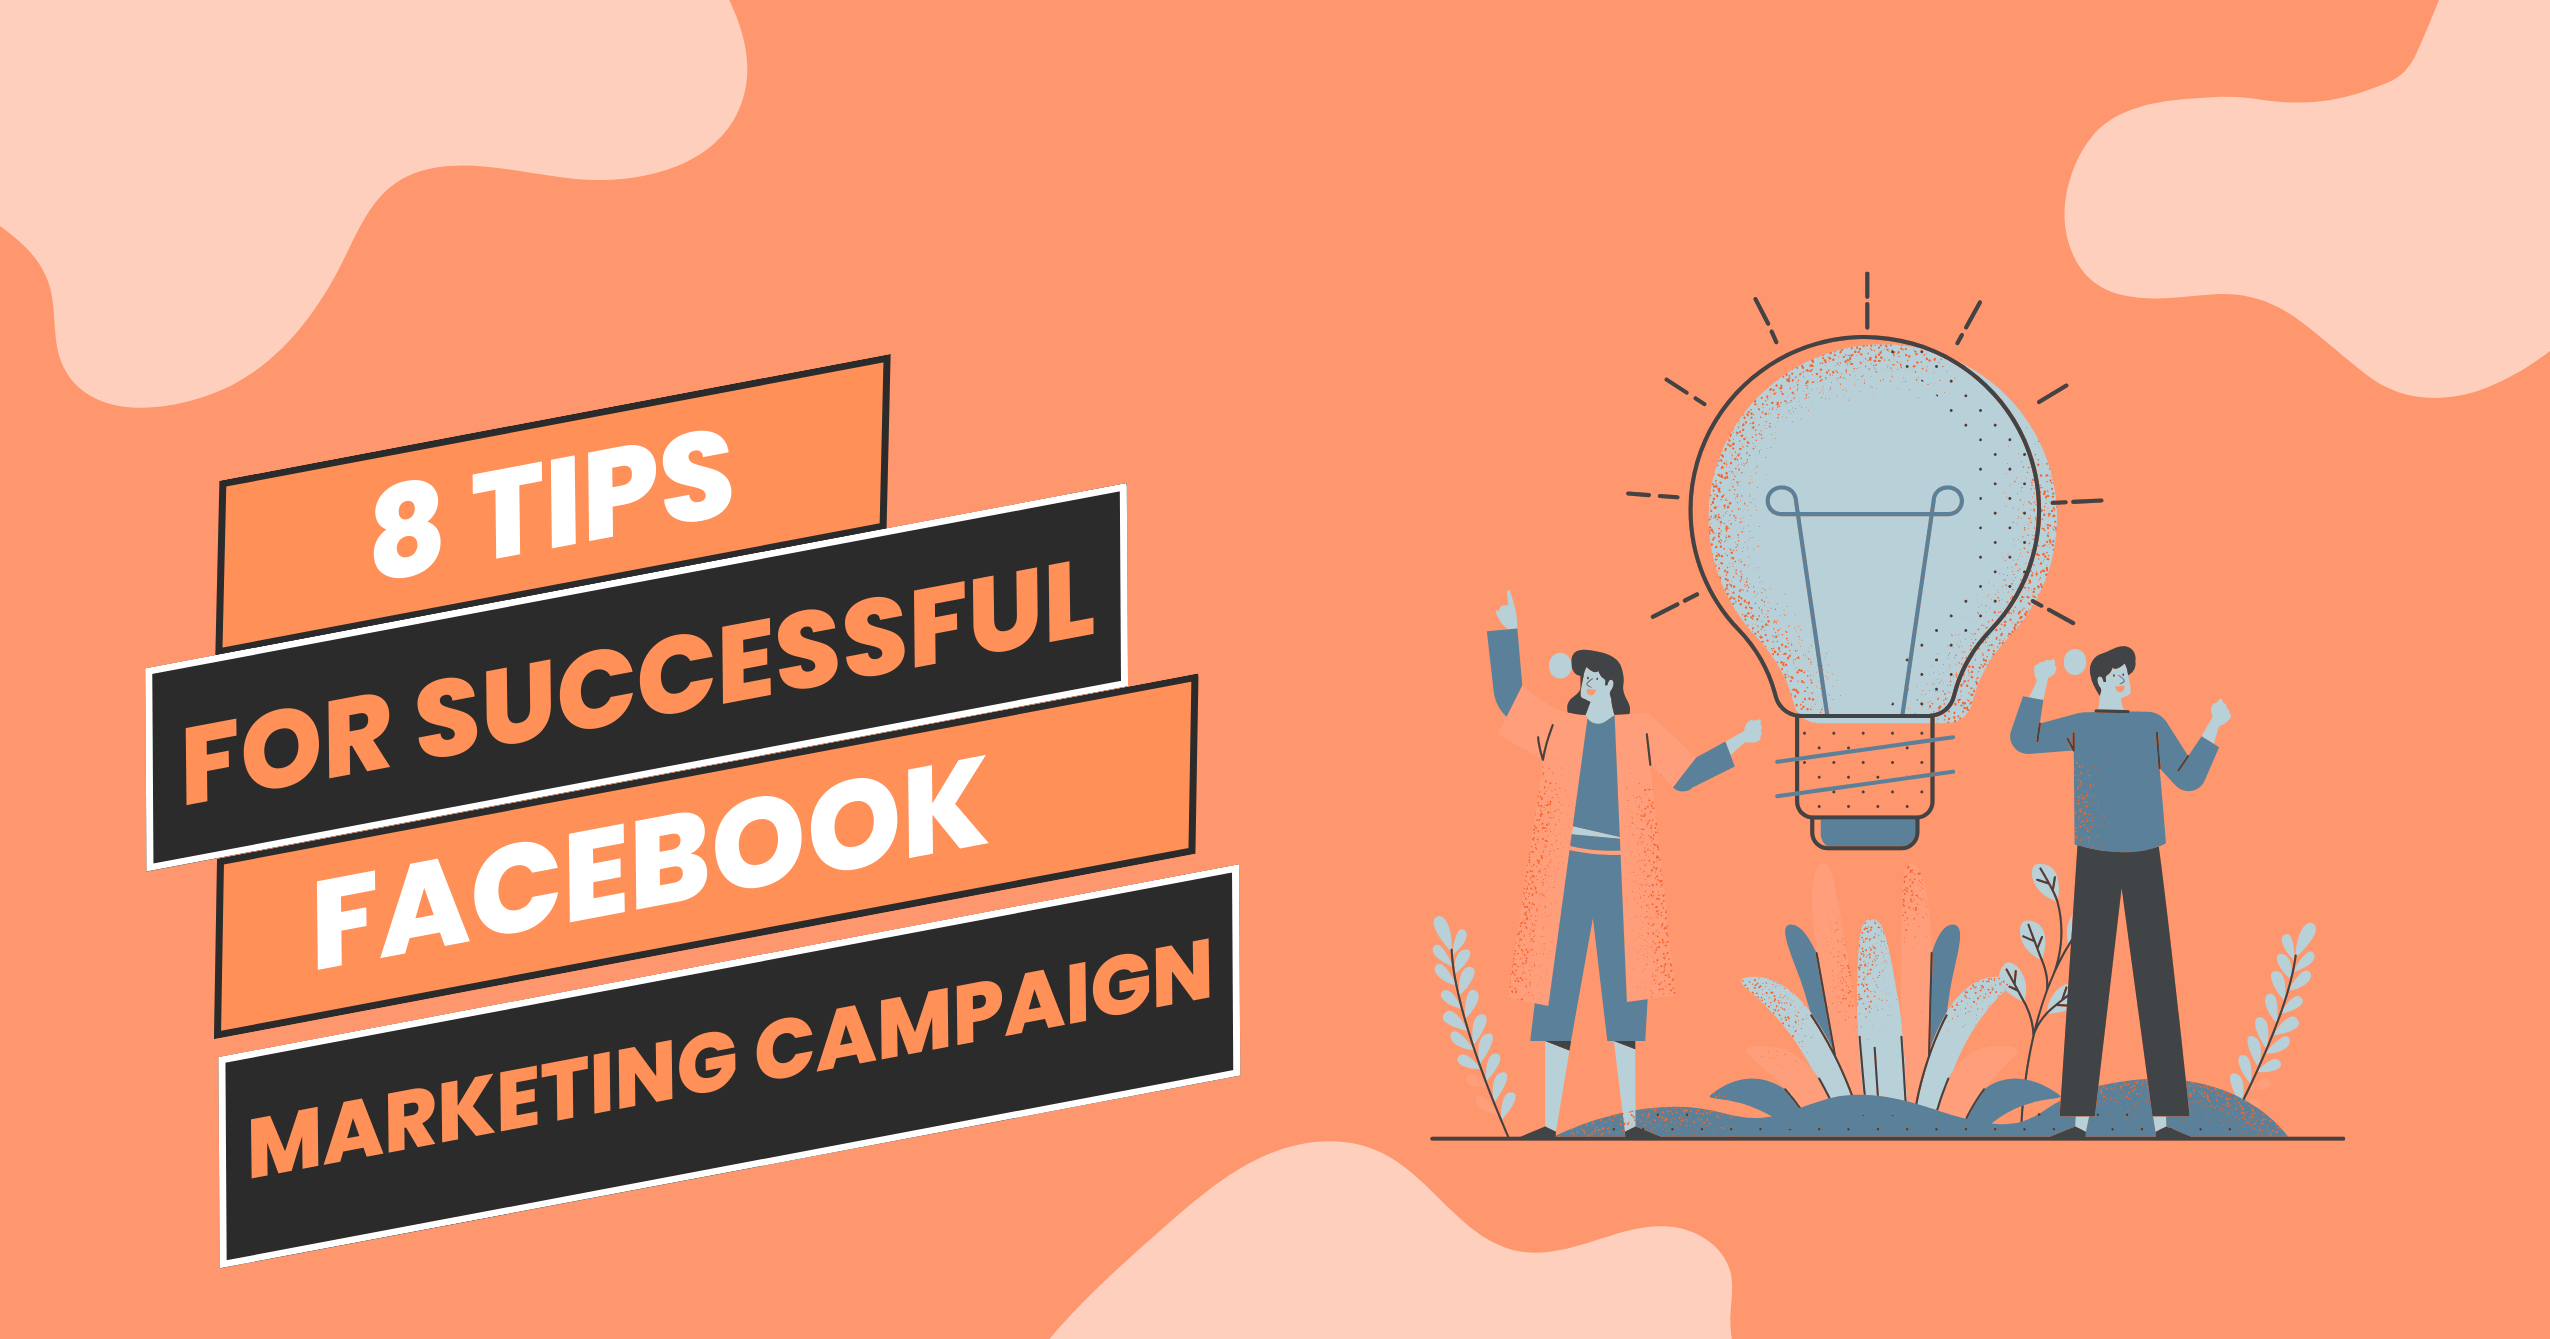 You are currently viewing 8 Basic Tips to Run a Successful Facebook Marketing Campaign